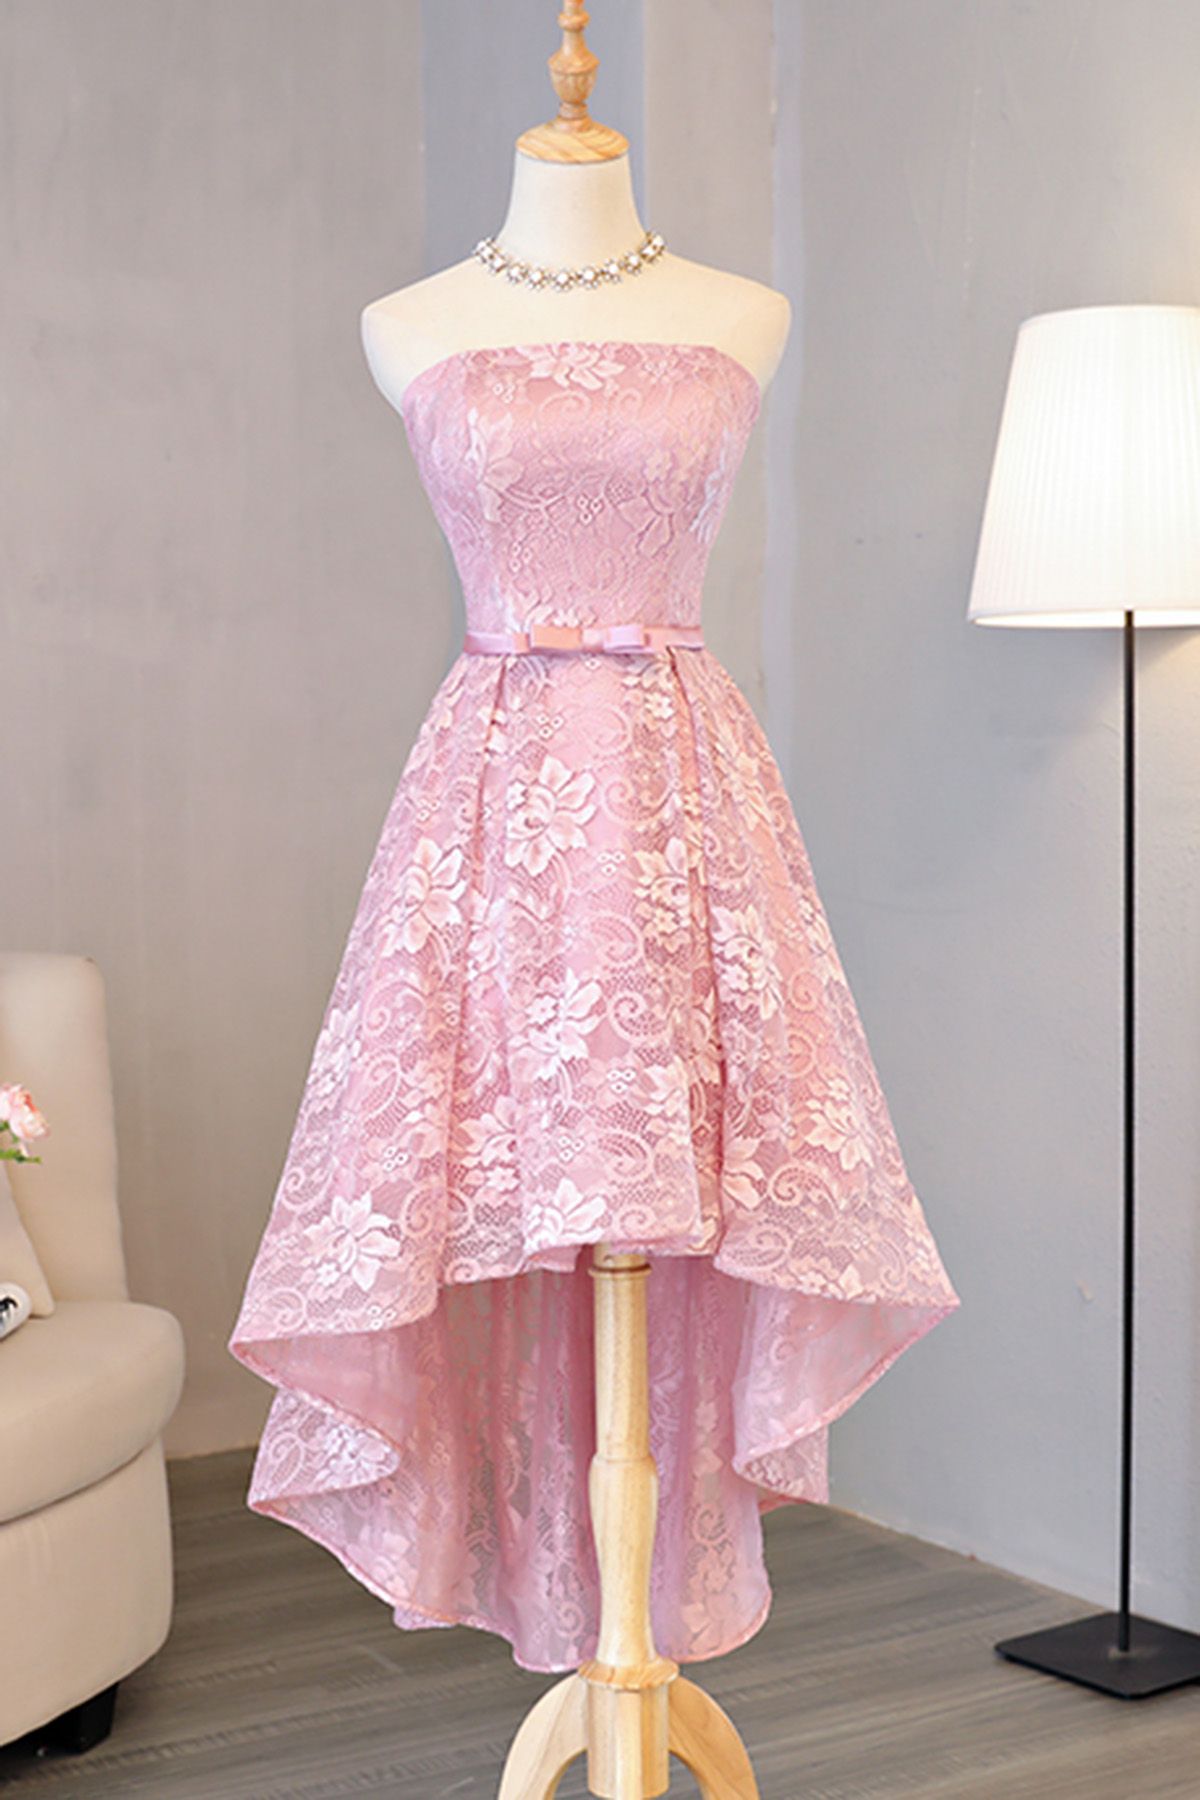 Customized A-line/princess Party Prom Dresses Short Pink Dresses With Lace Up Bowknot High-low Comely Homecoming Dresses